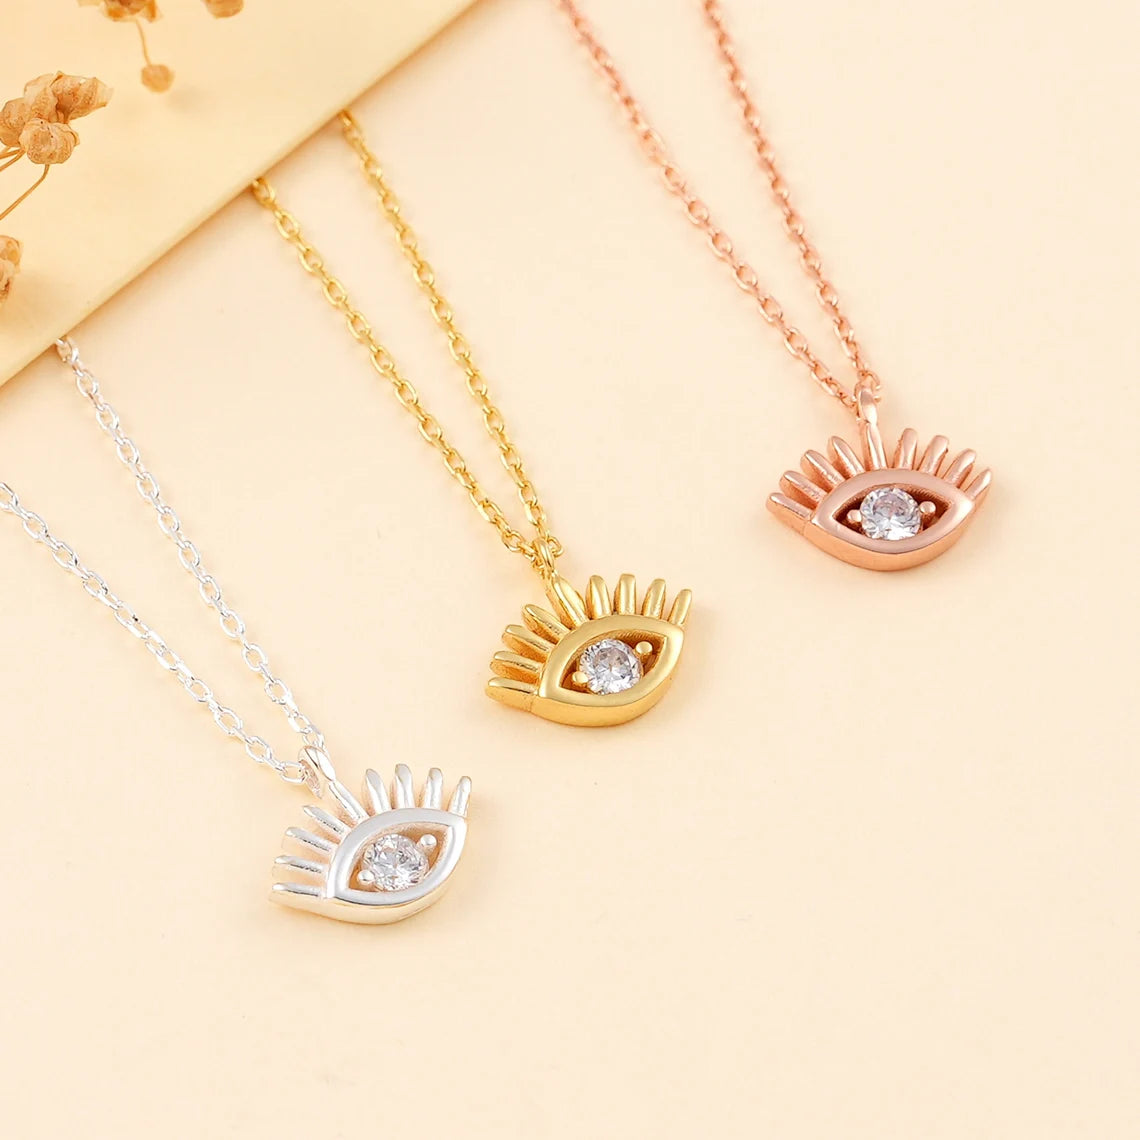 18 Carat Gold Tiny Evil Eye Necklace - Stylish Protection with Cultural Significance